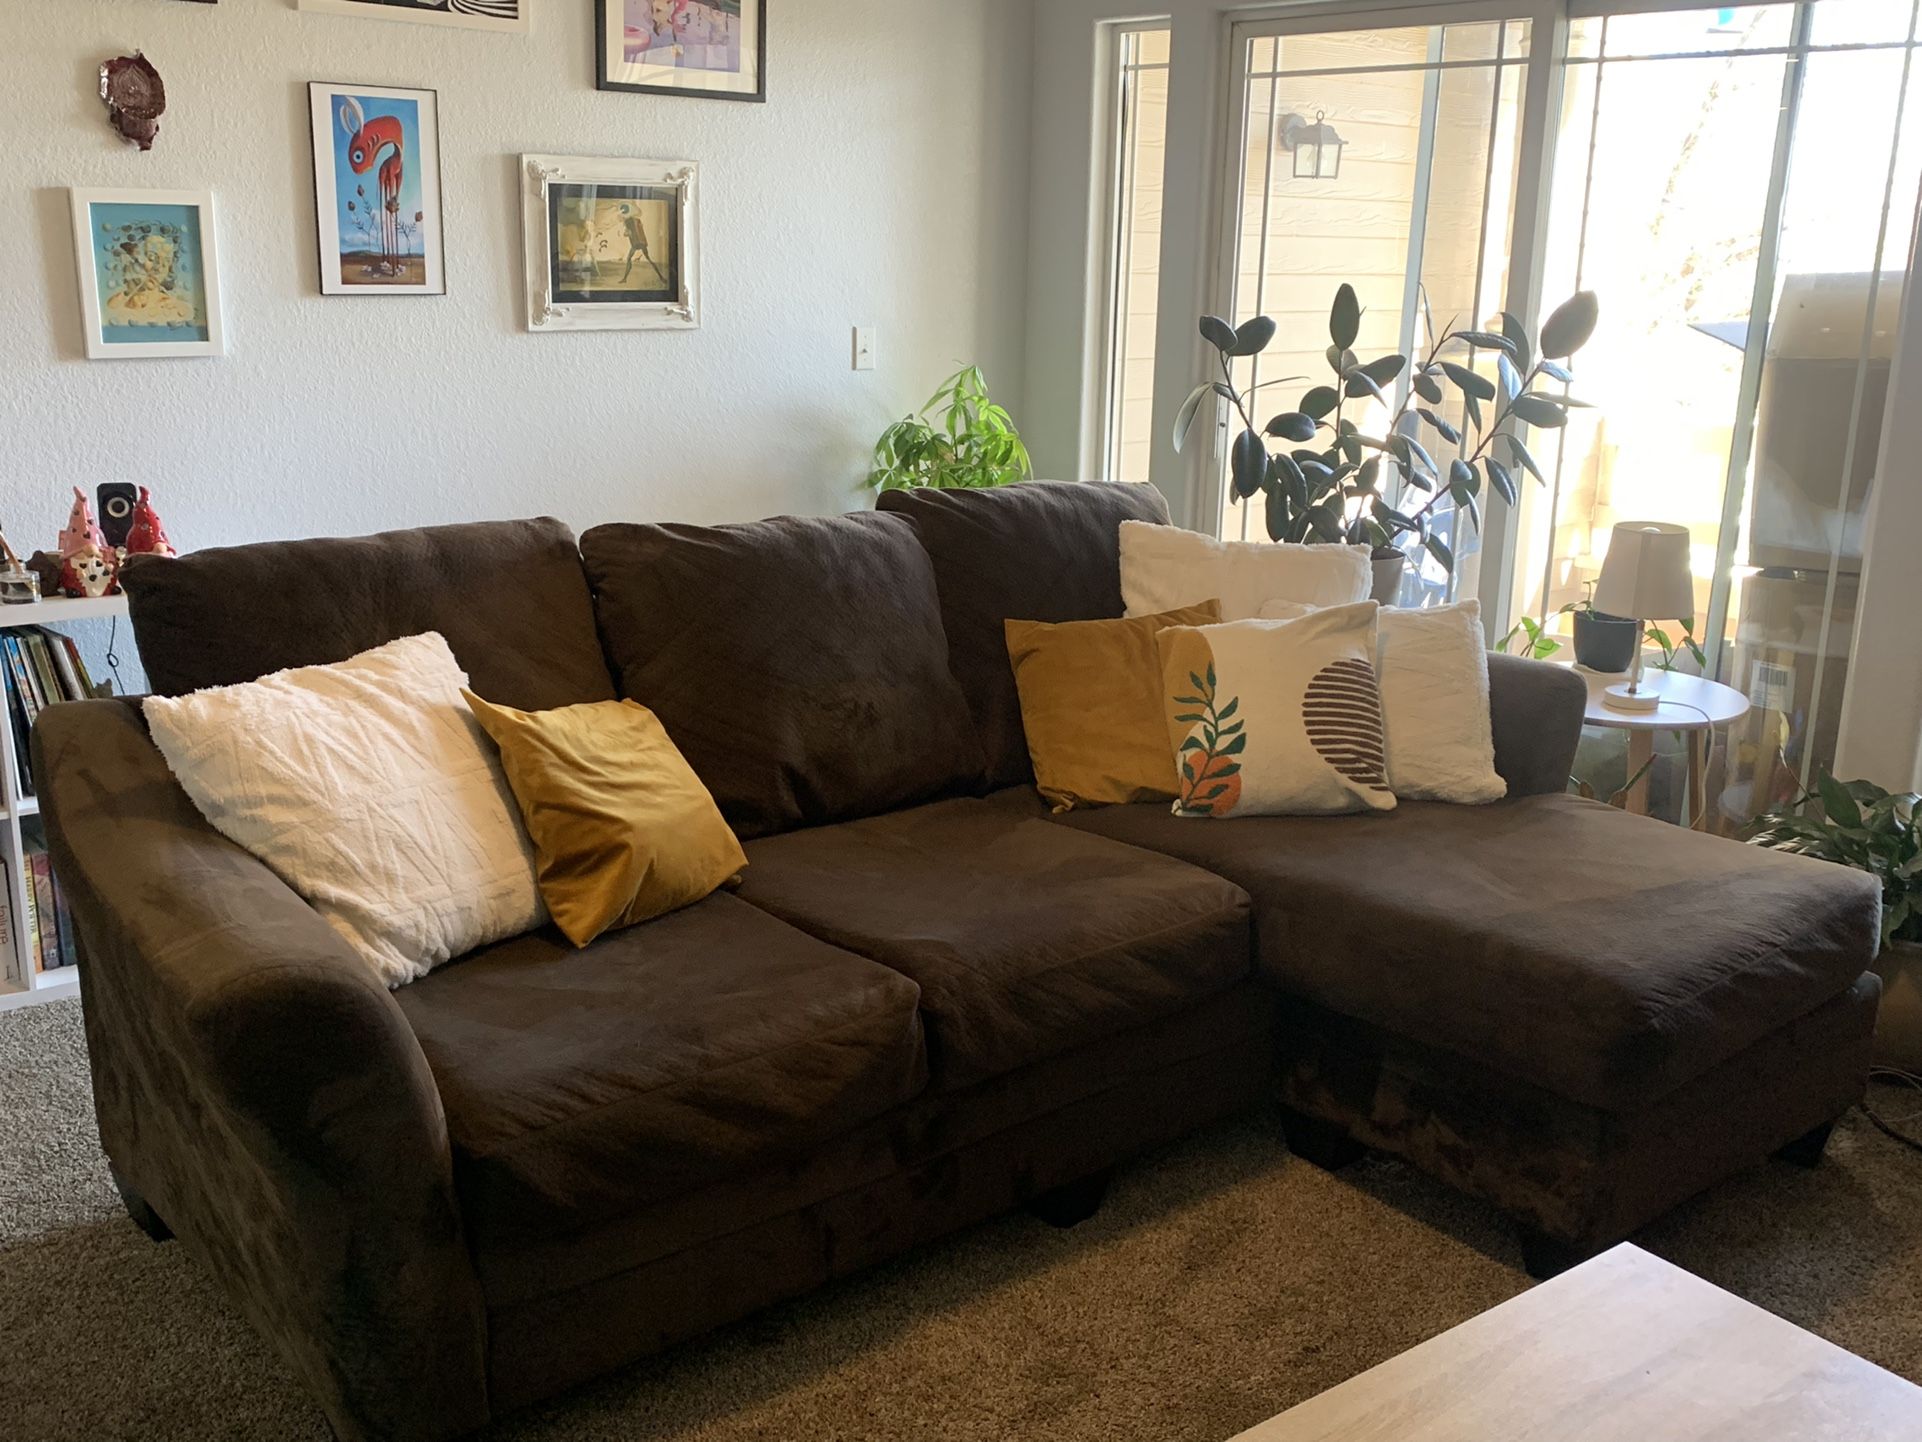 Couch (chaise lounge)